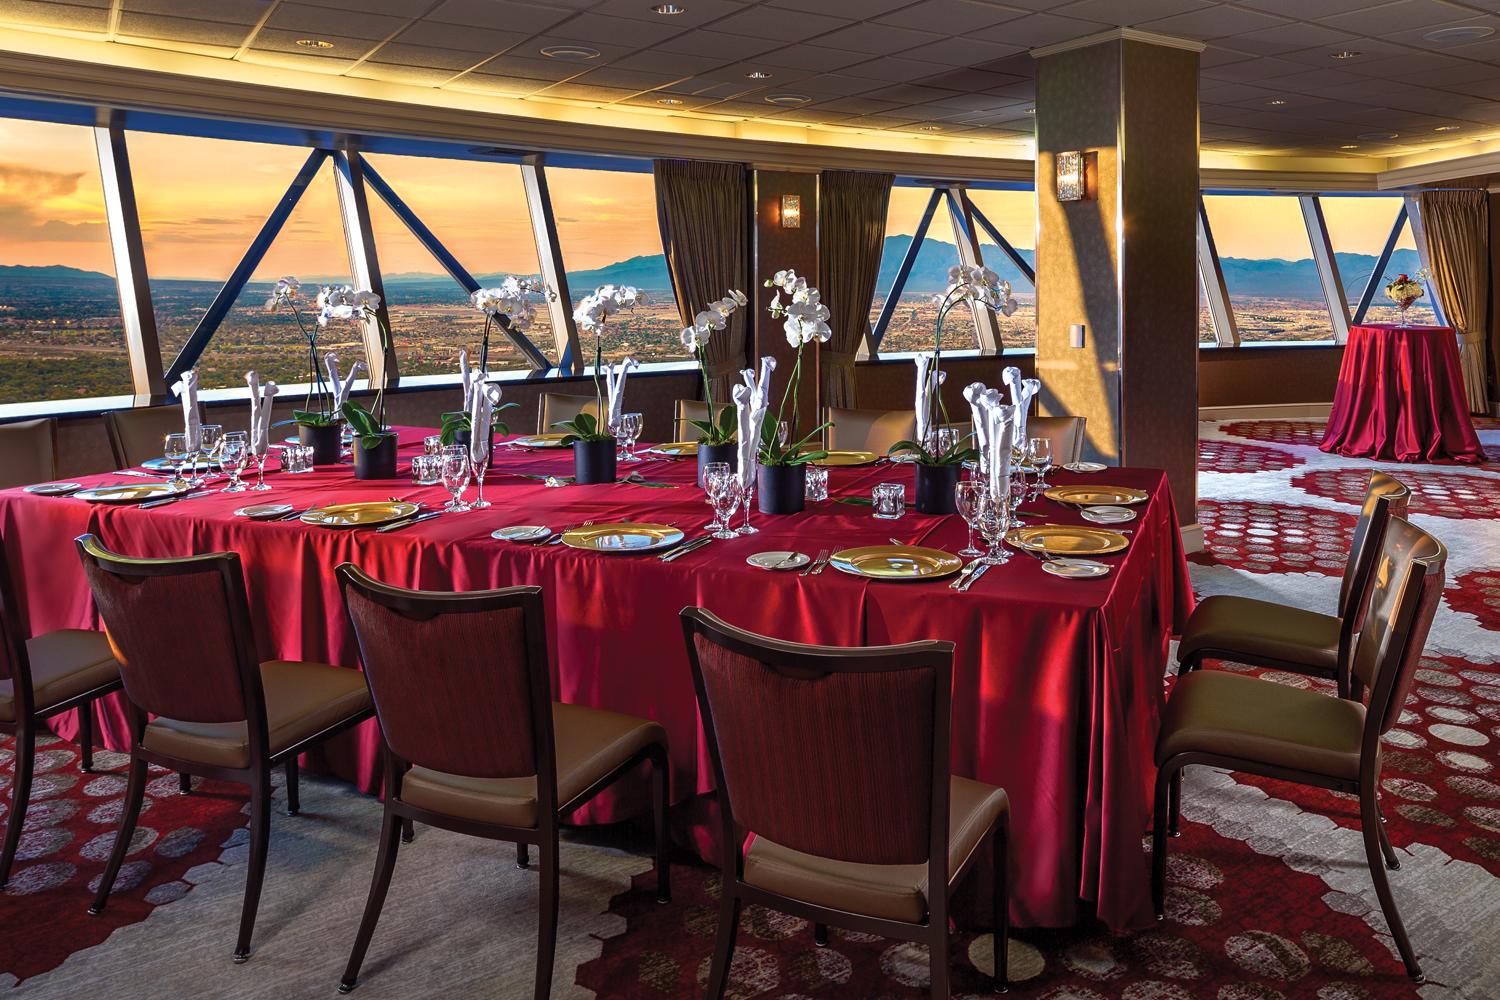 The STRAT SkyPod Horizon Room with a table with red tablecloth and full table set up for dinner and a view of the Las Vegas valley at sunset out the windows